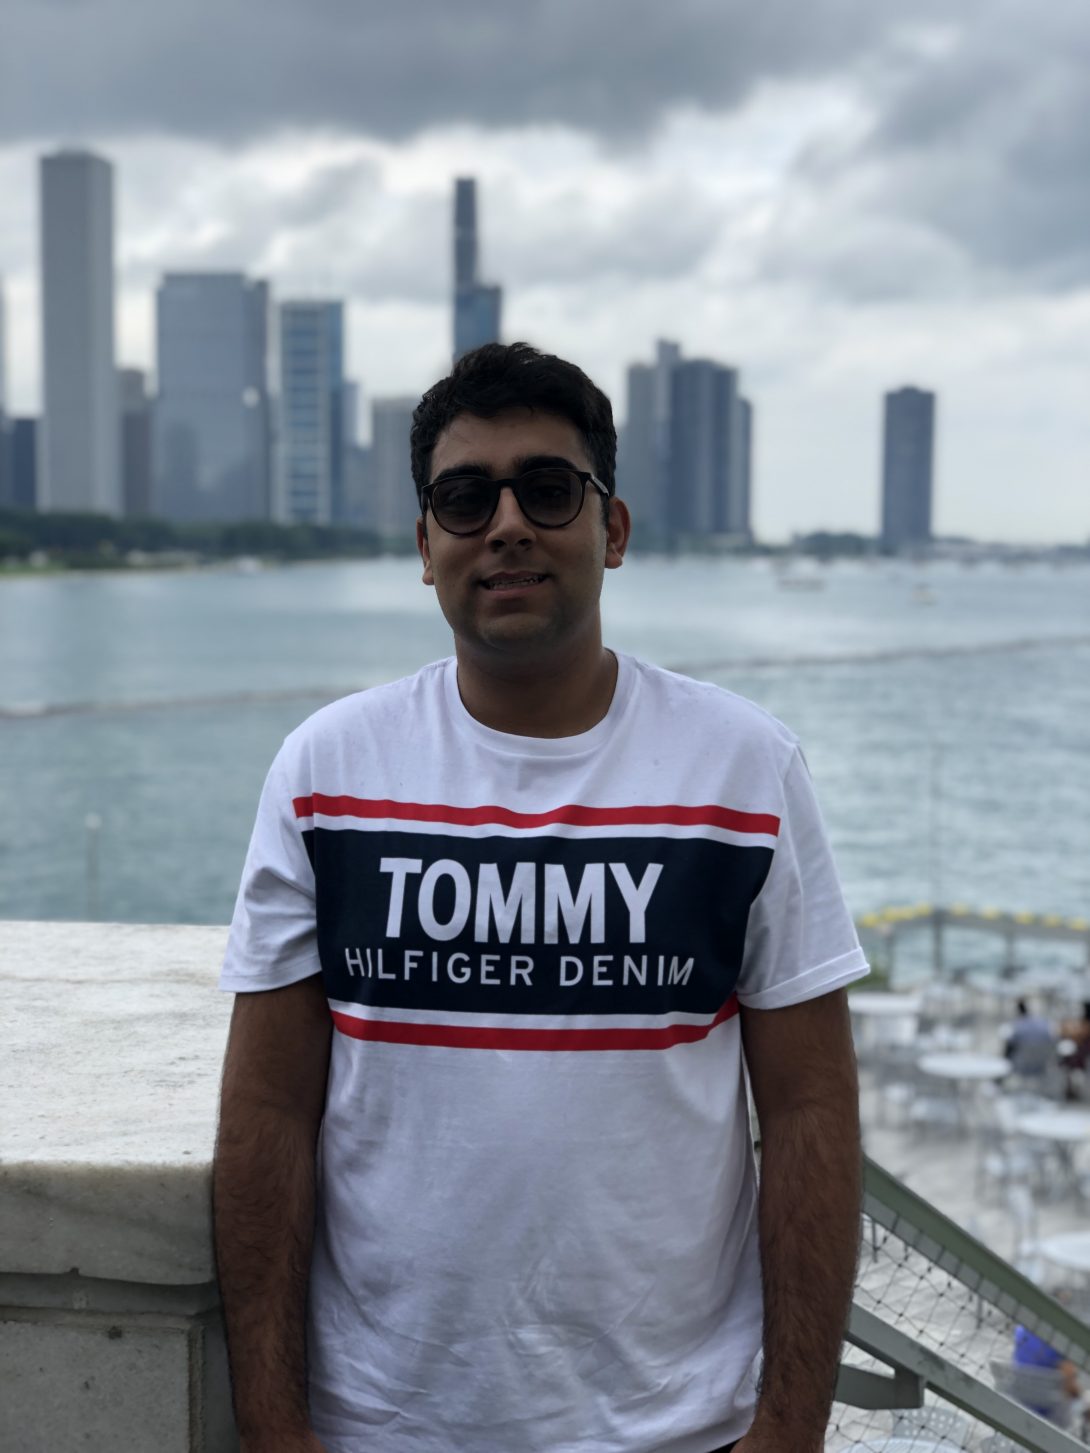 Amir Shirsalimian, a senior mechanical and industrial engineering student, recently won first place at UIC’s Undergraduate Research Forum in the Engineering/Physical Sciences category